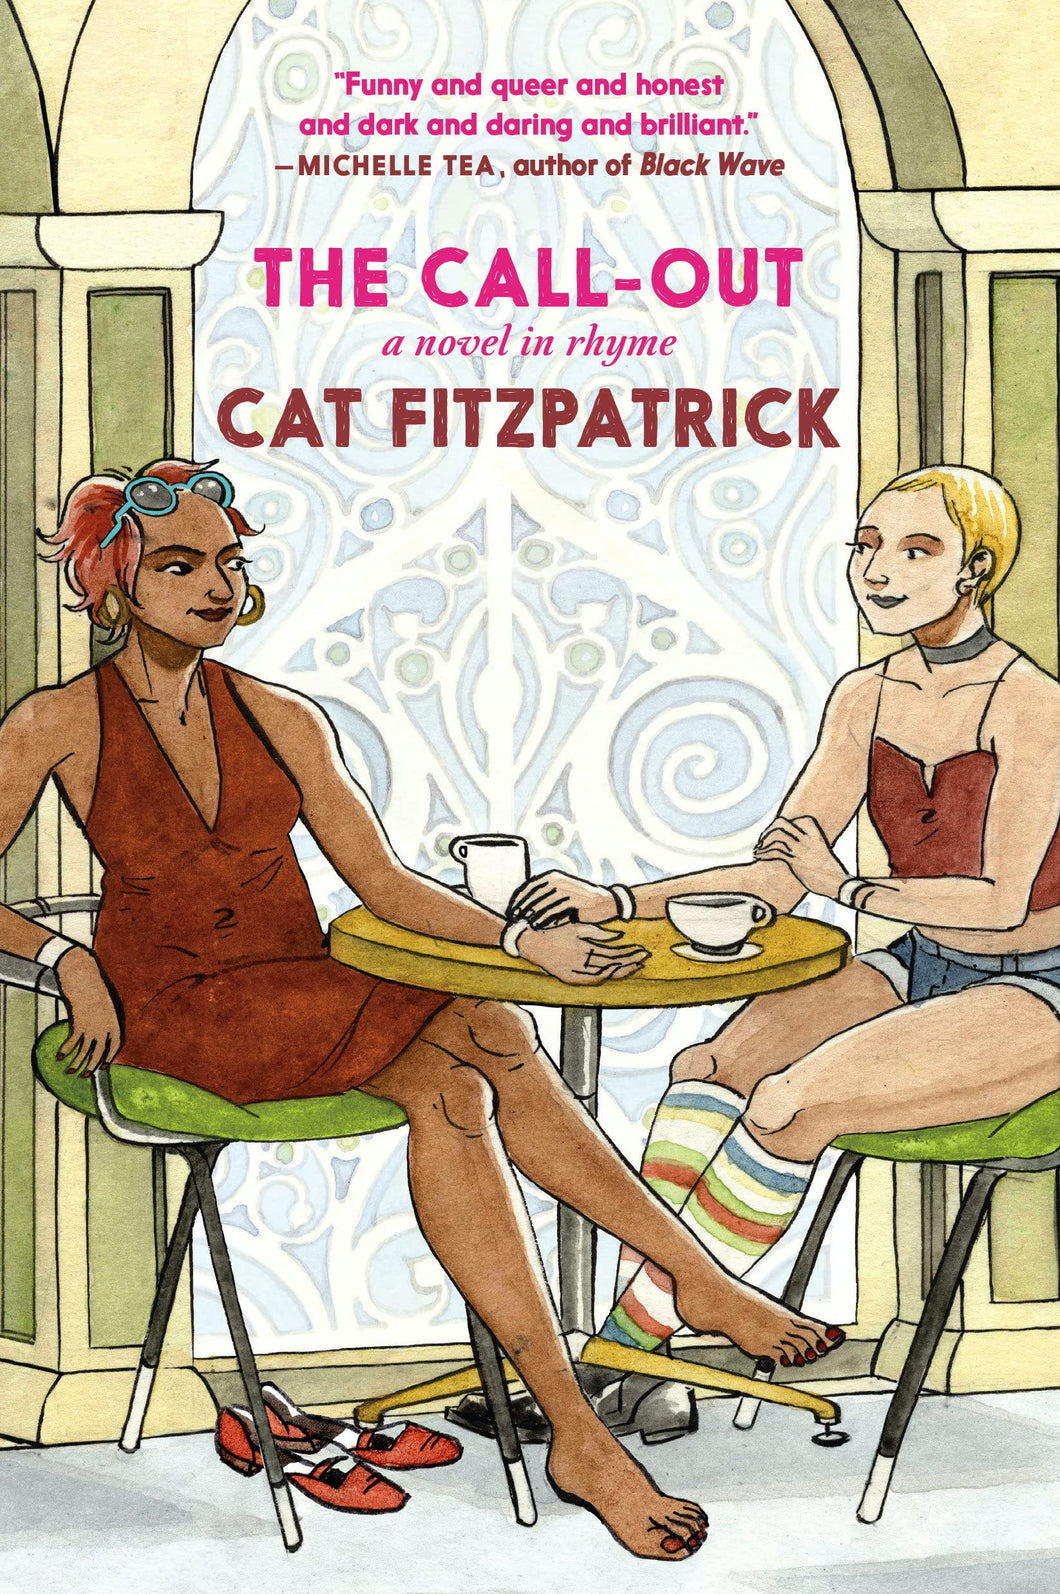 The Call-Out: A Novel In Rhyme [Cat Fitzpatrick]